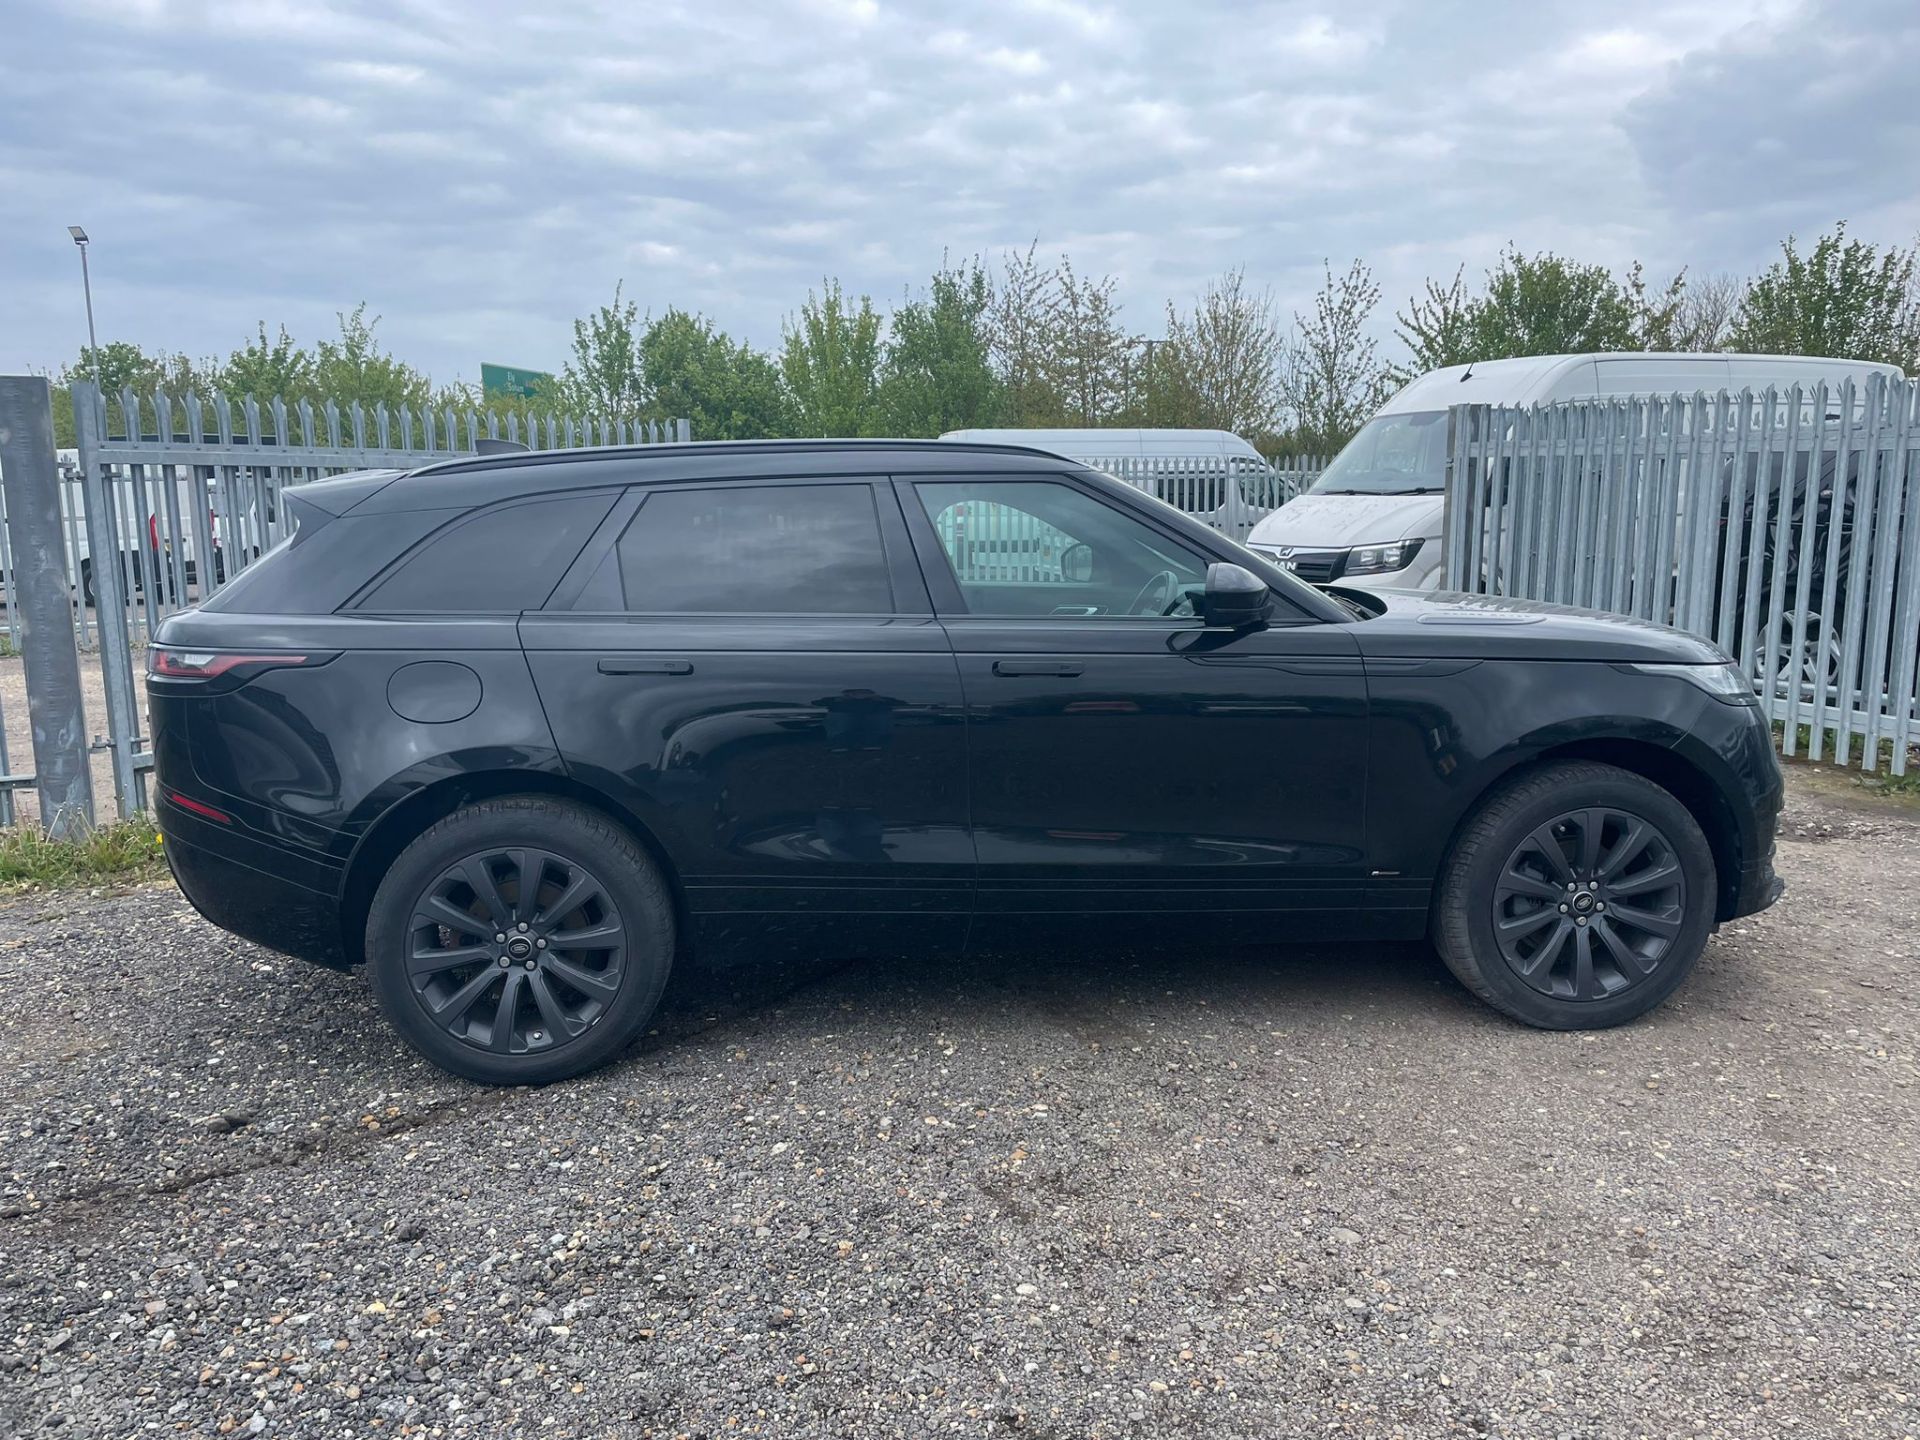 Land Rover Range Rover Velar 2.0 D240 R-Dynamic S 2018 '18 Reg' 4WD - Panoramic Roof- ULEZ Compliant - Image 10 of 33